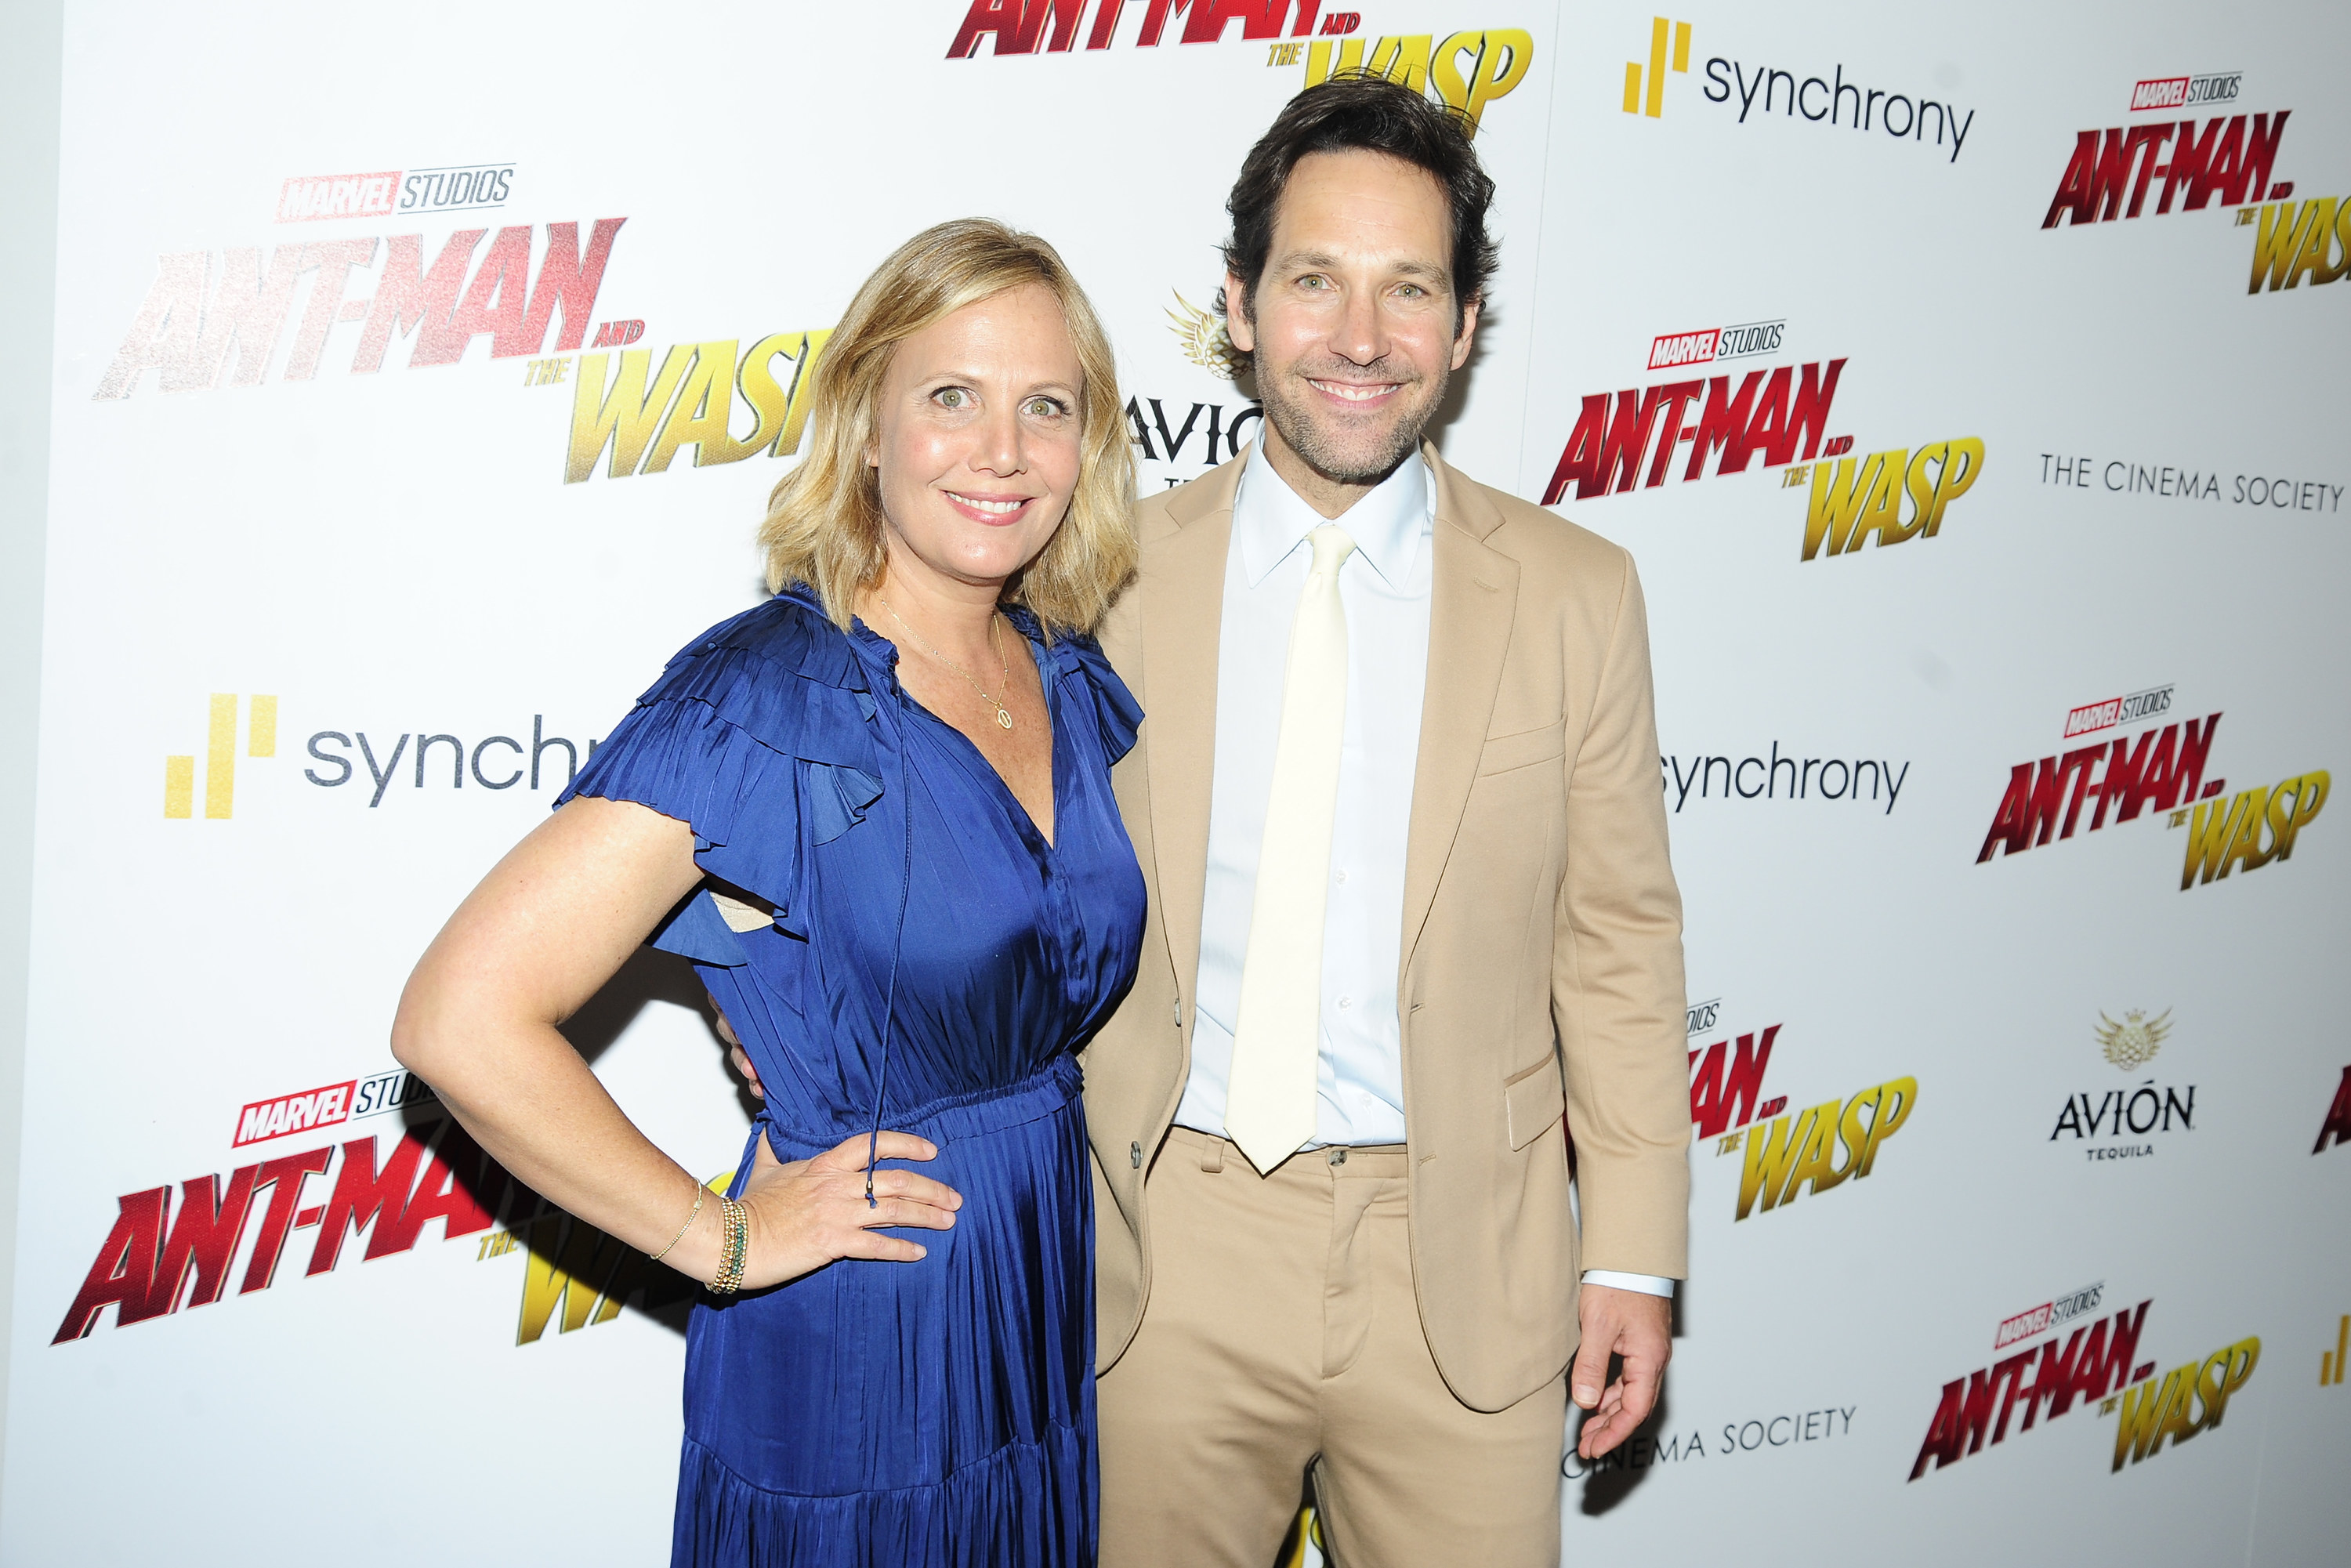 the two posing at an Ant-Man premiere